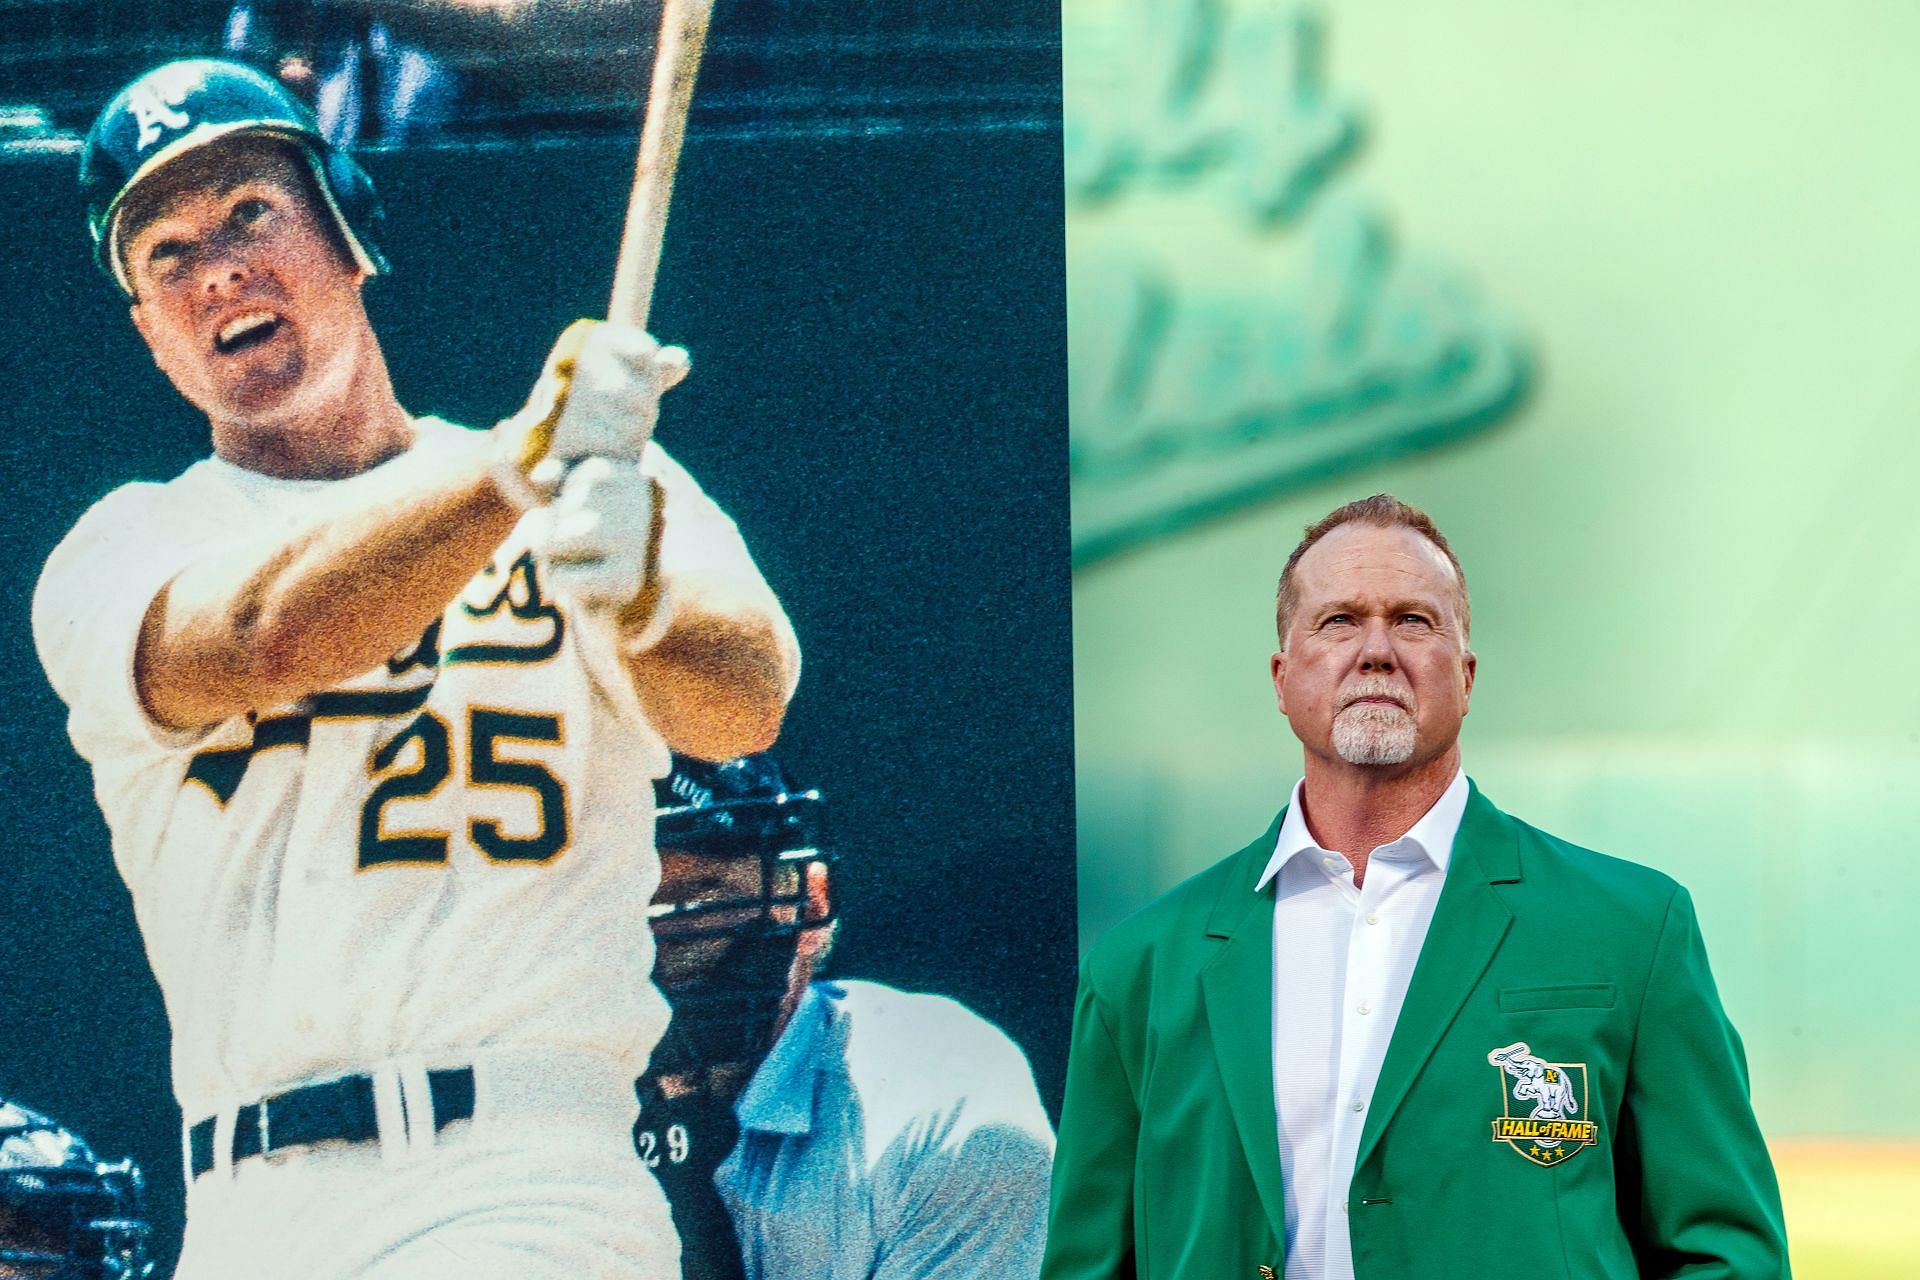 Images of Mark McGwire